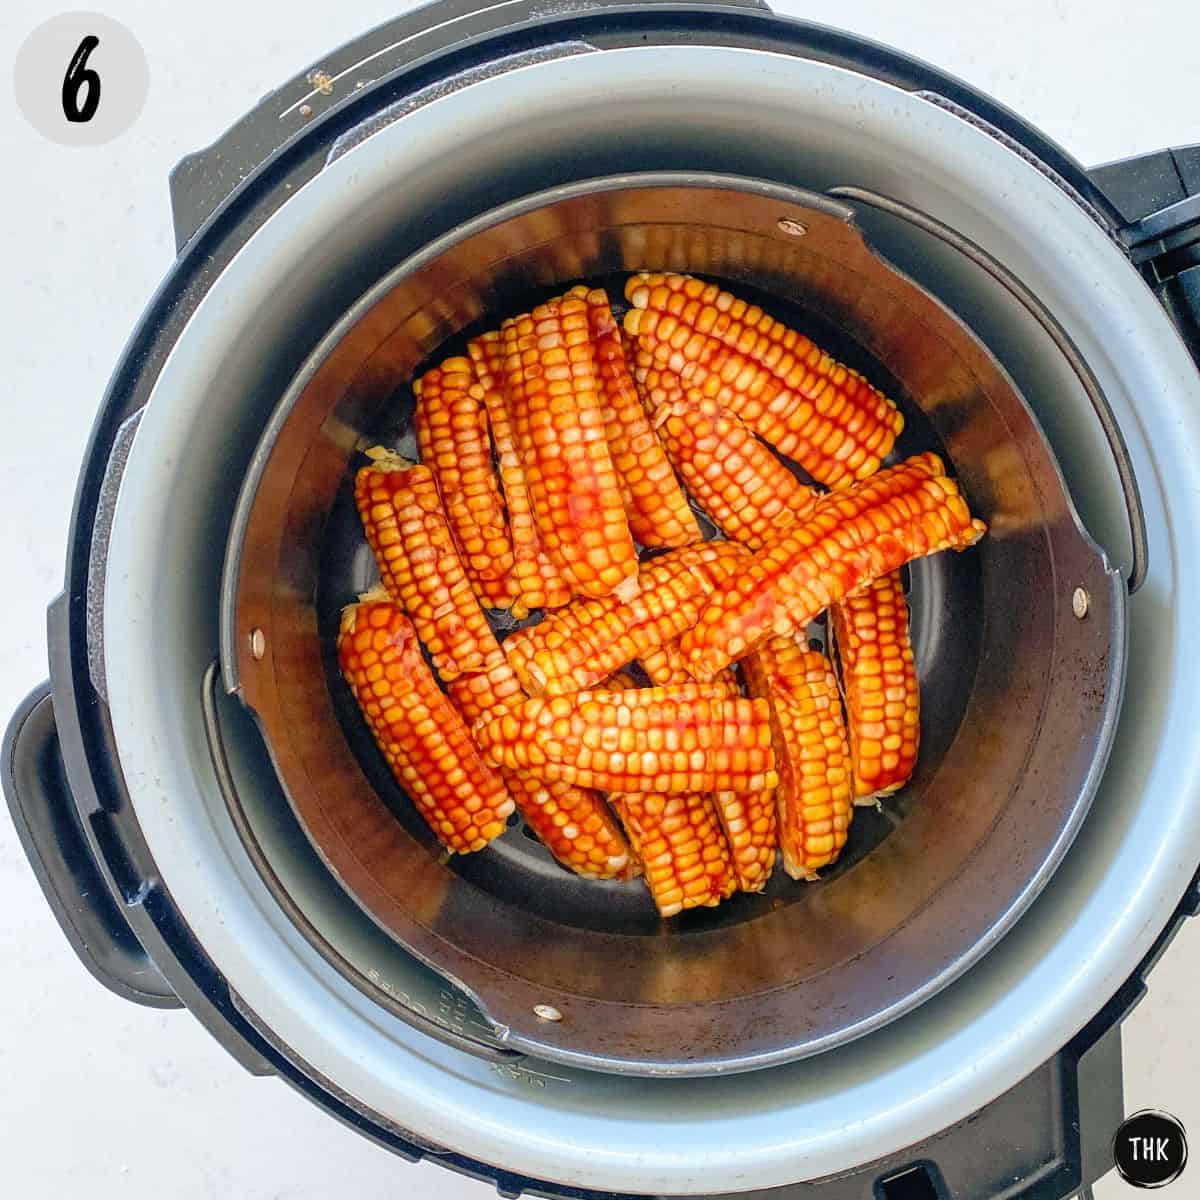 Corn pieces covered in bbq sauce sitting in air fryer basket.